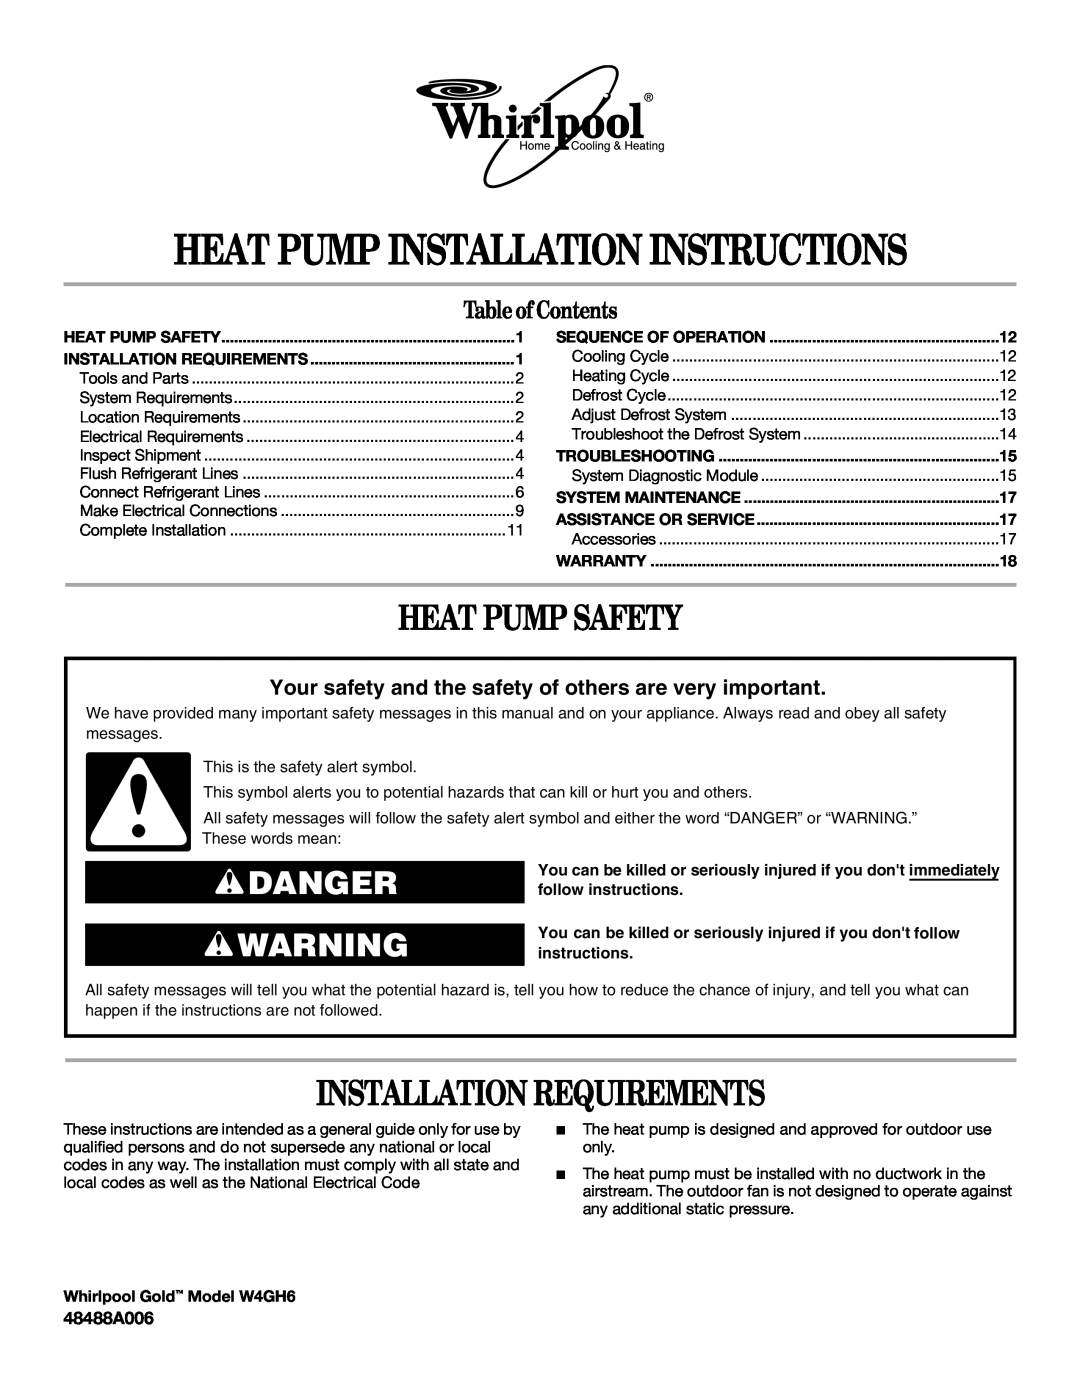 Whirlpool W4GH6 installation instructions Heat Pump Safety, Installation Requirements, 48488A006, Sequence Of Operation 